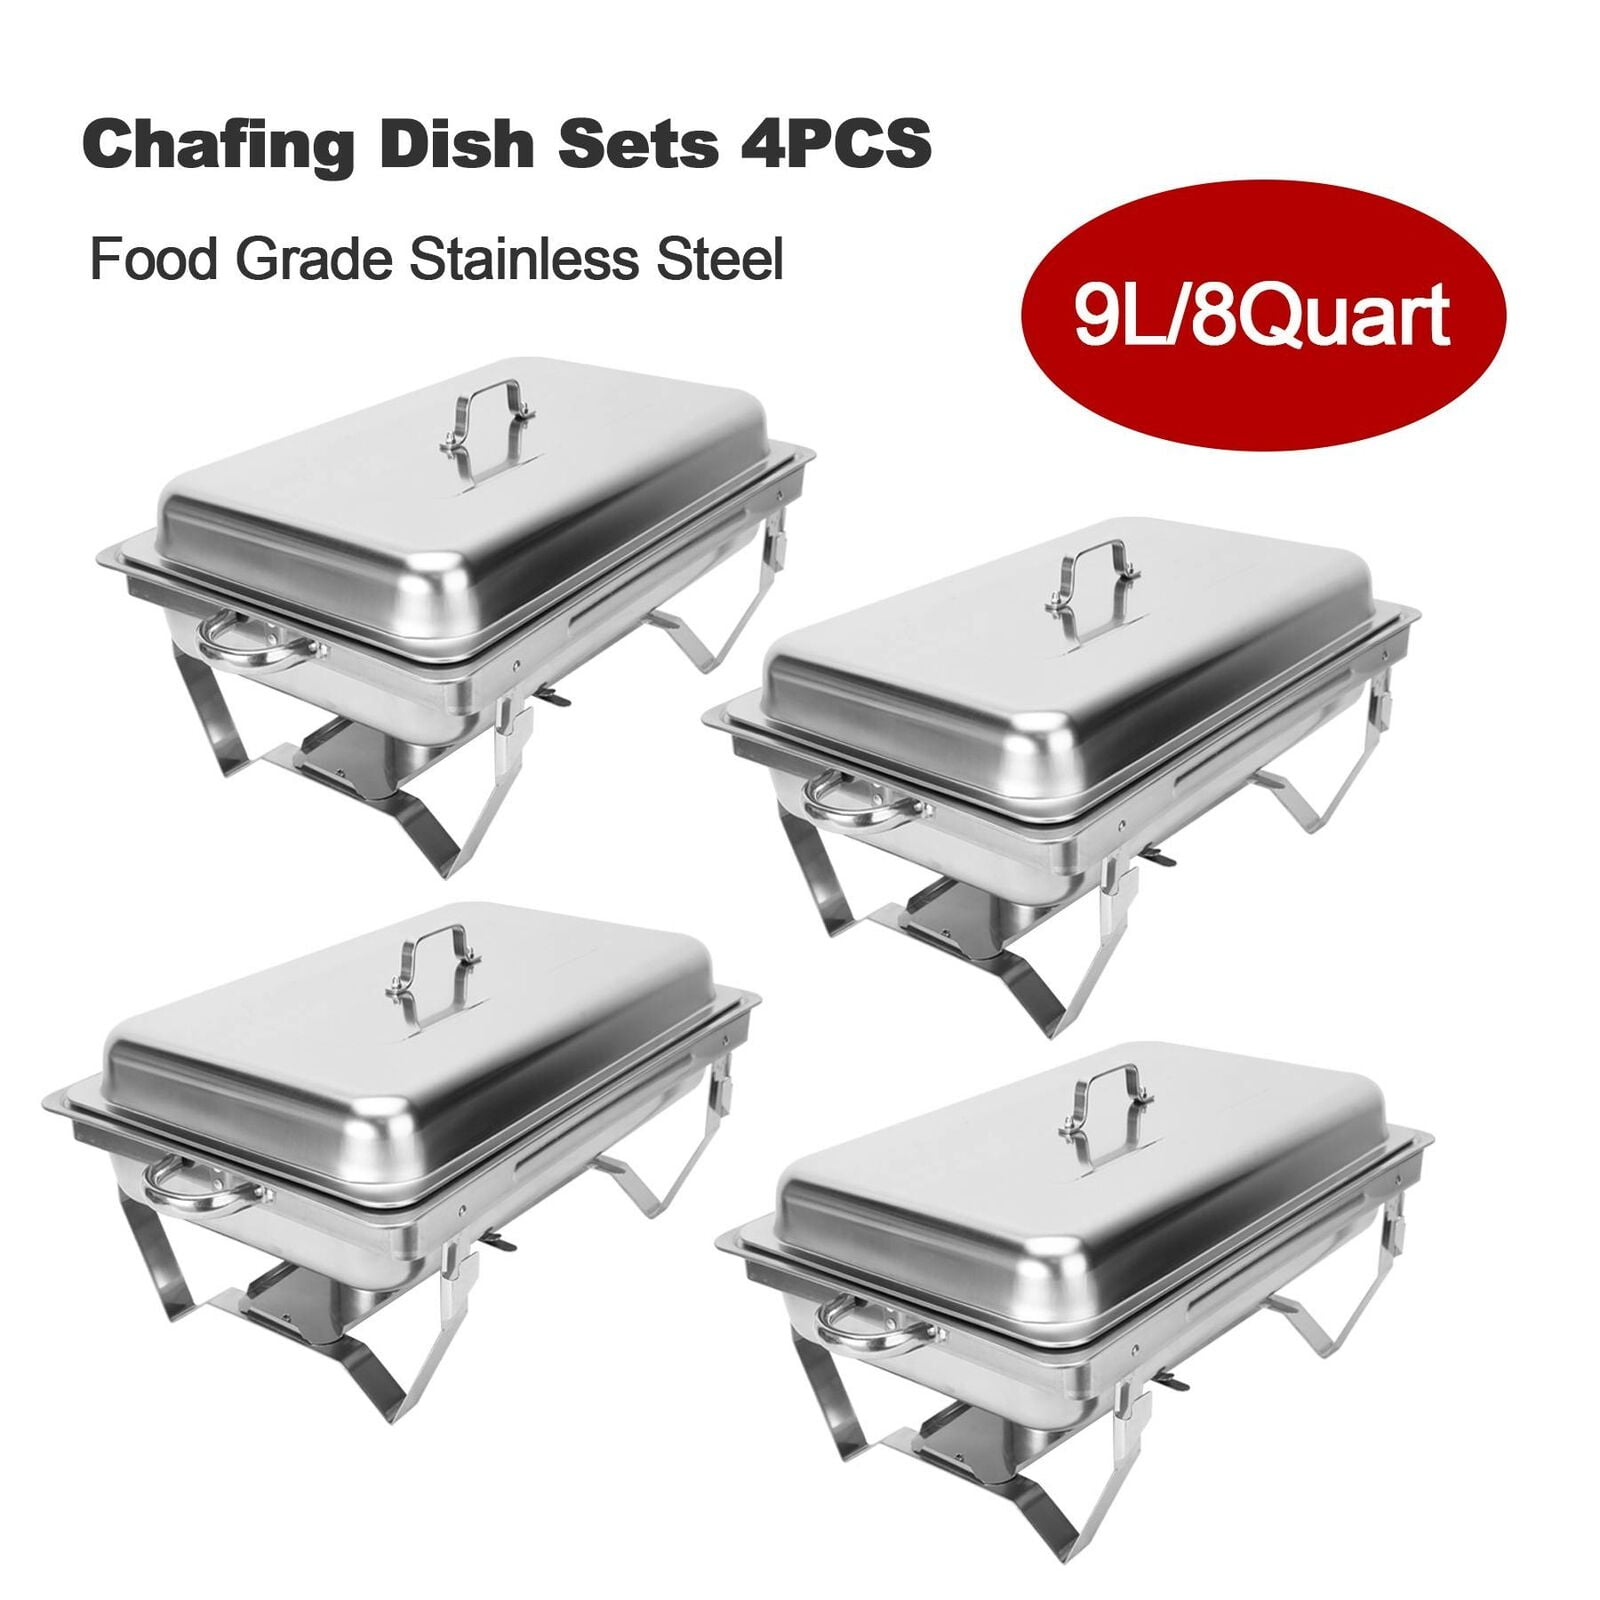 2Pack Catering Stainless Steel Pans Mirror Finish Chafer Chafing Dish Sets 9L/8Q 